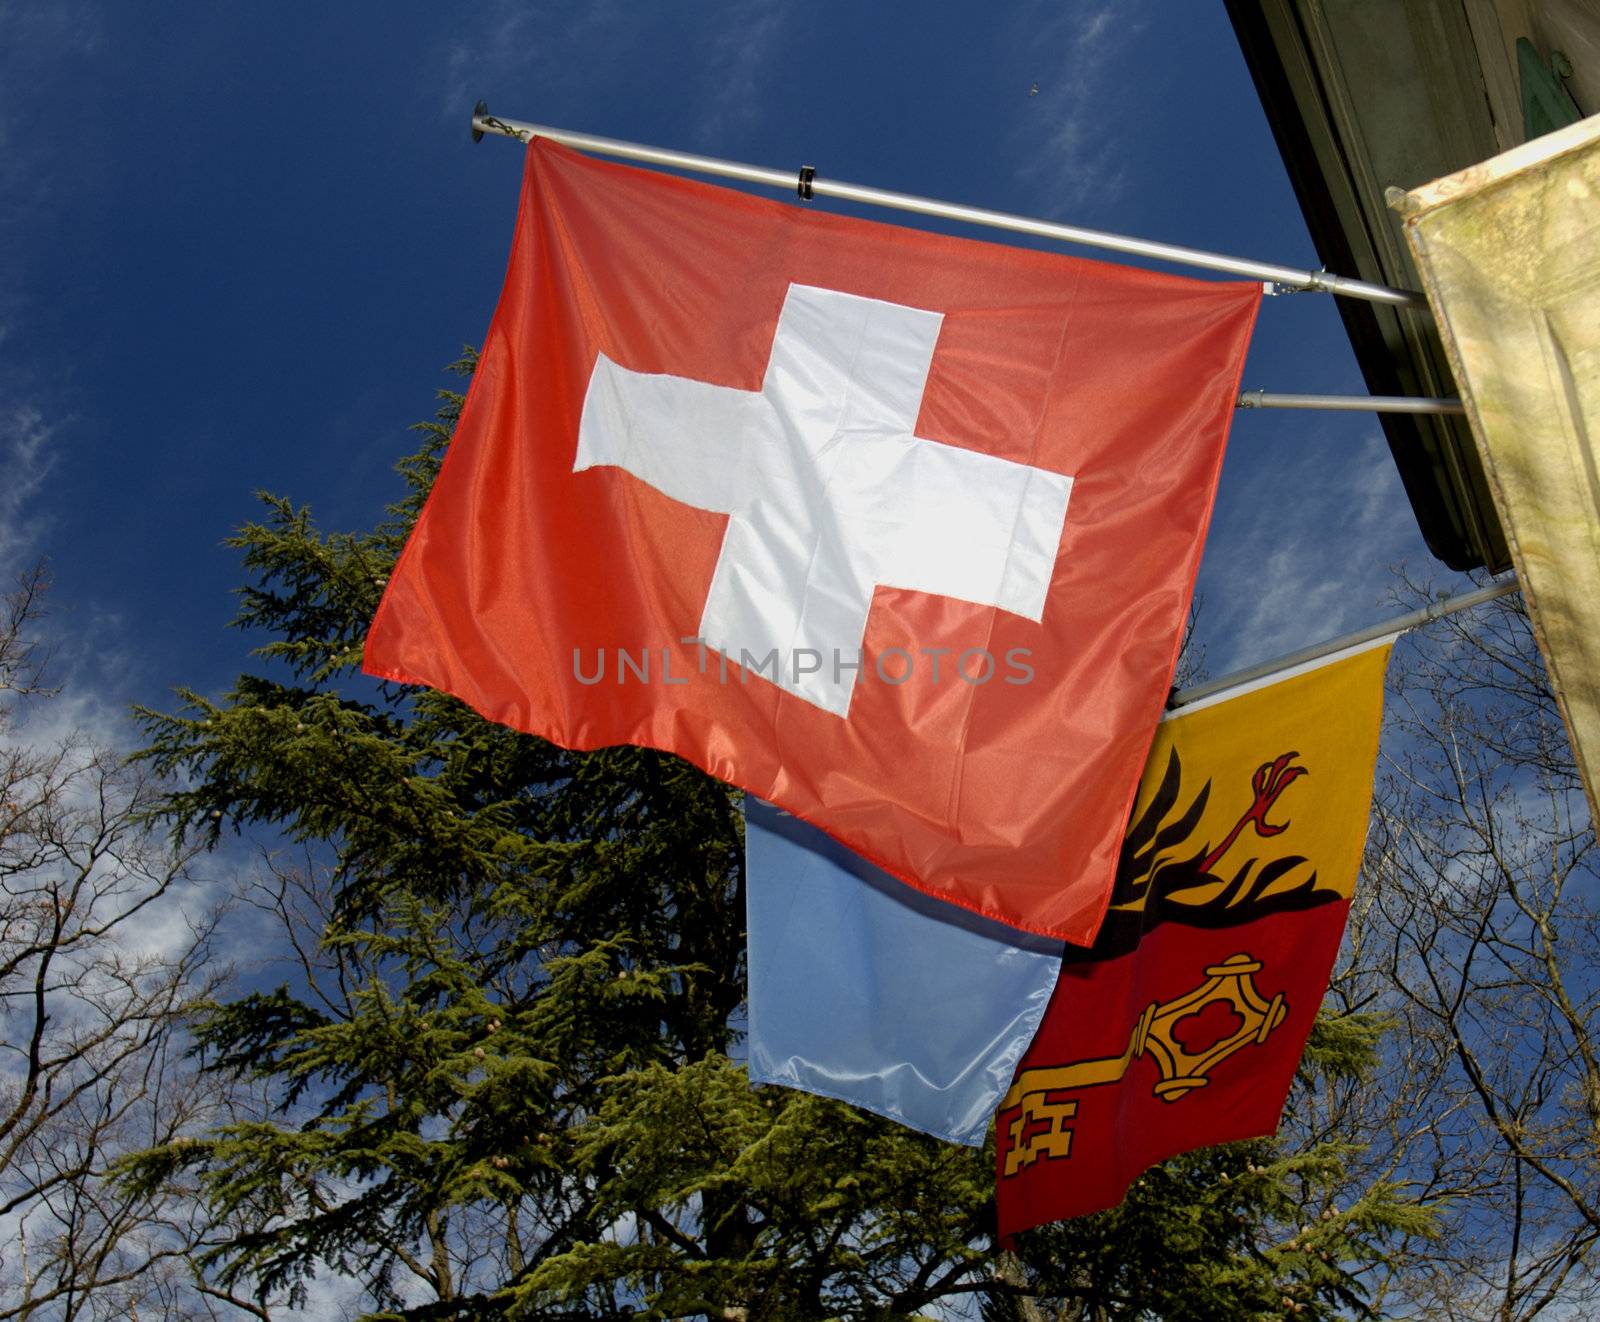 The flag of the Swiss Confederation with the flag of the canton of Geneva behind, against a blue sky laced with fine clouds.